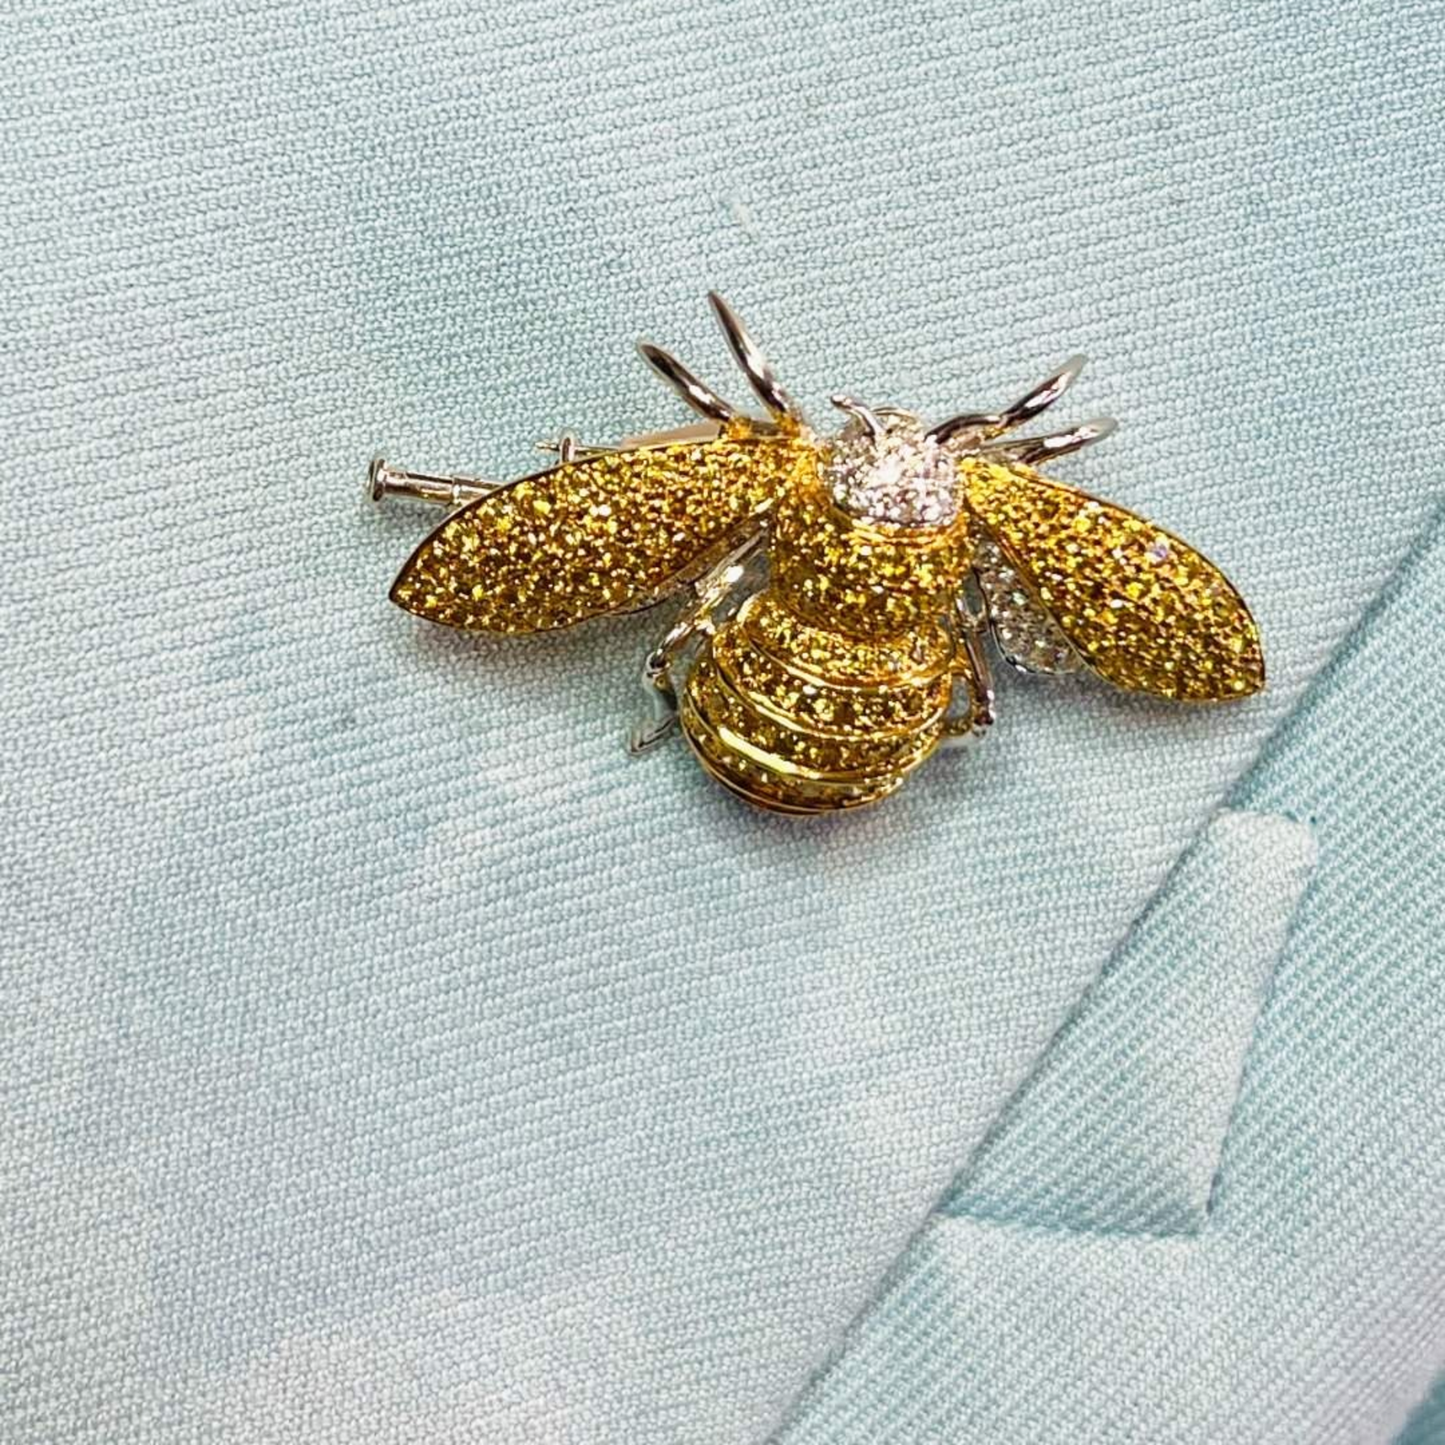 Post-1980s 18KT Yellow & White Gold Diamond Bumble Bee Brooch worn on lapel